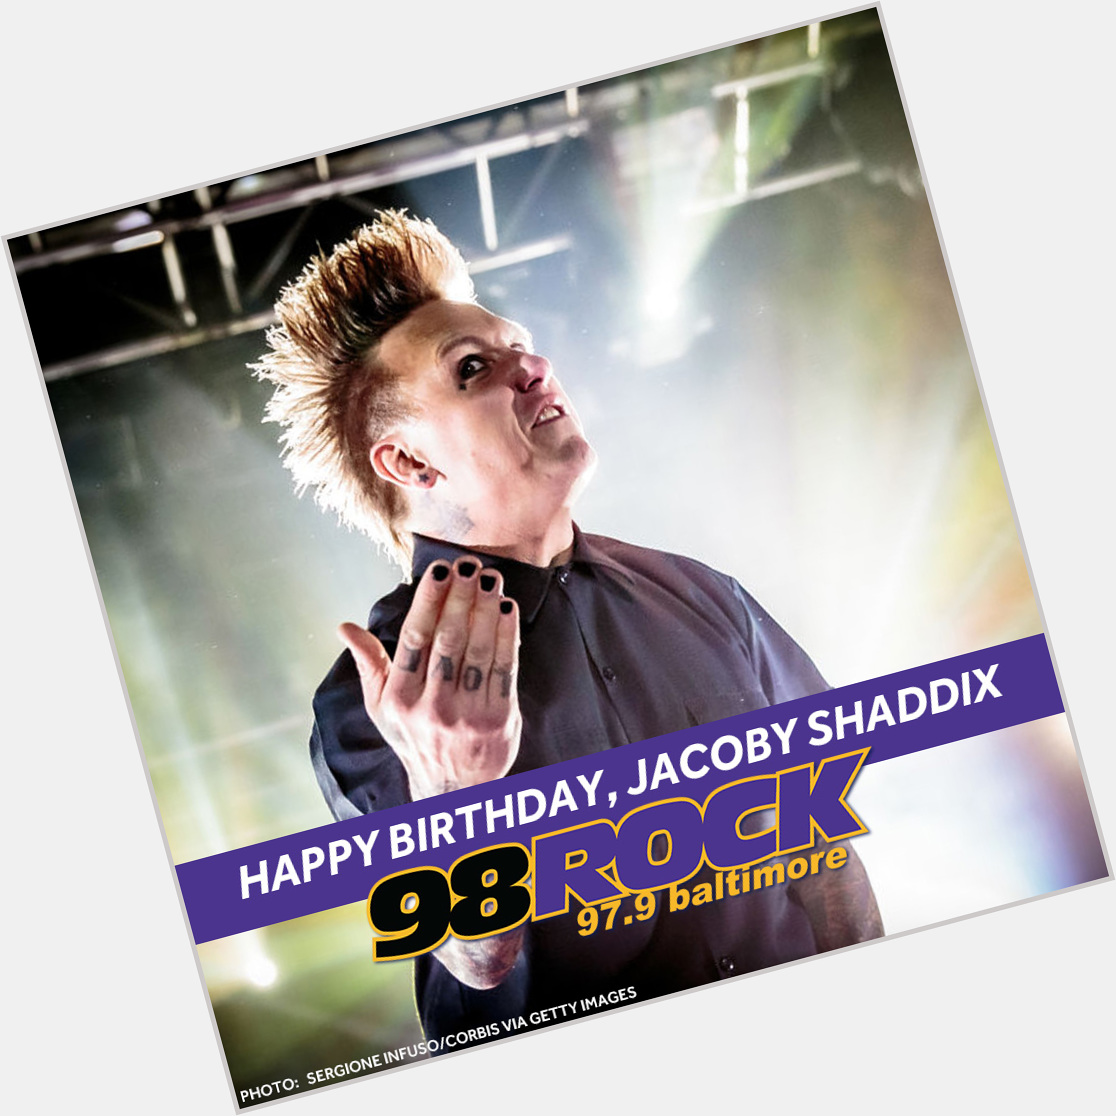 Happy Birthday to Jacoby Shaddix of who turns 45 today!  